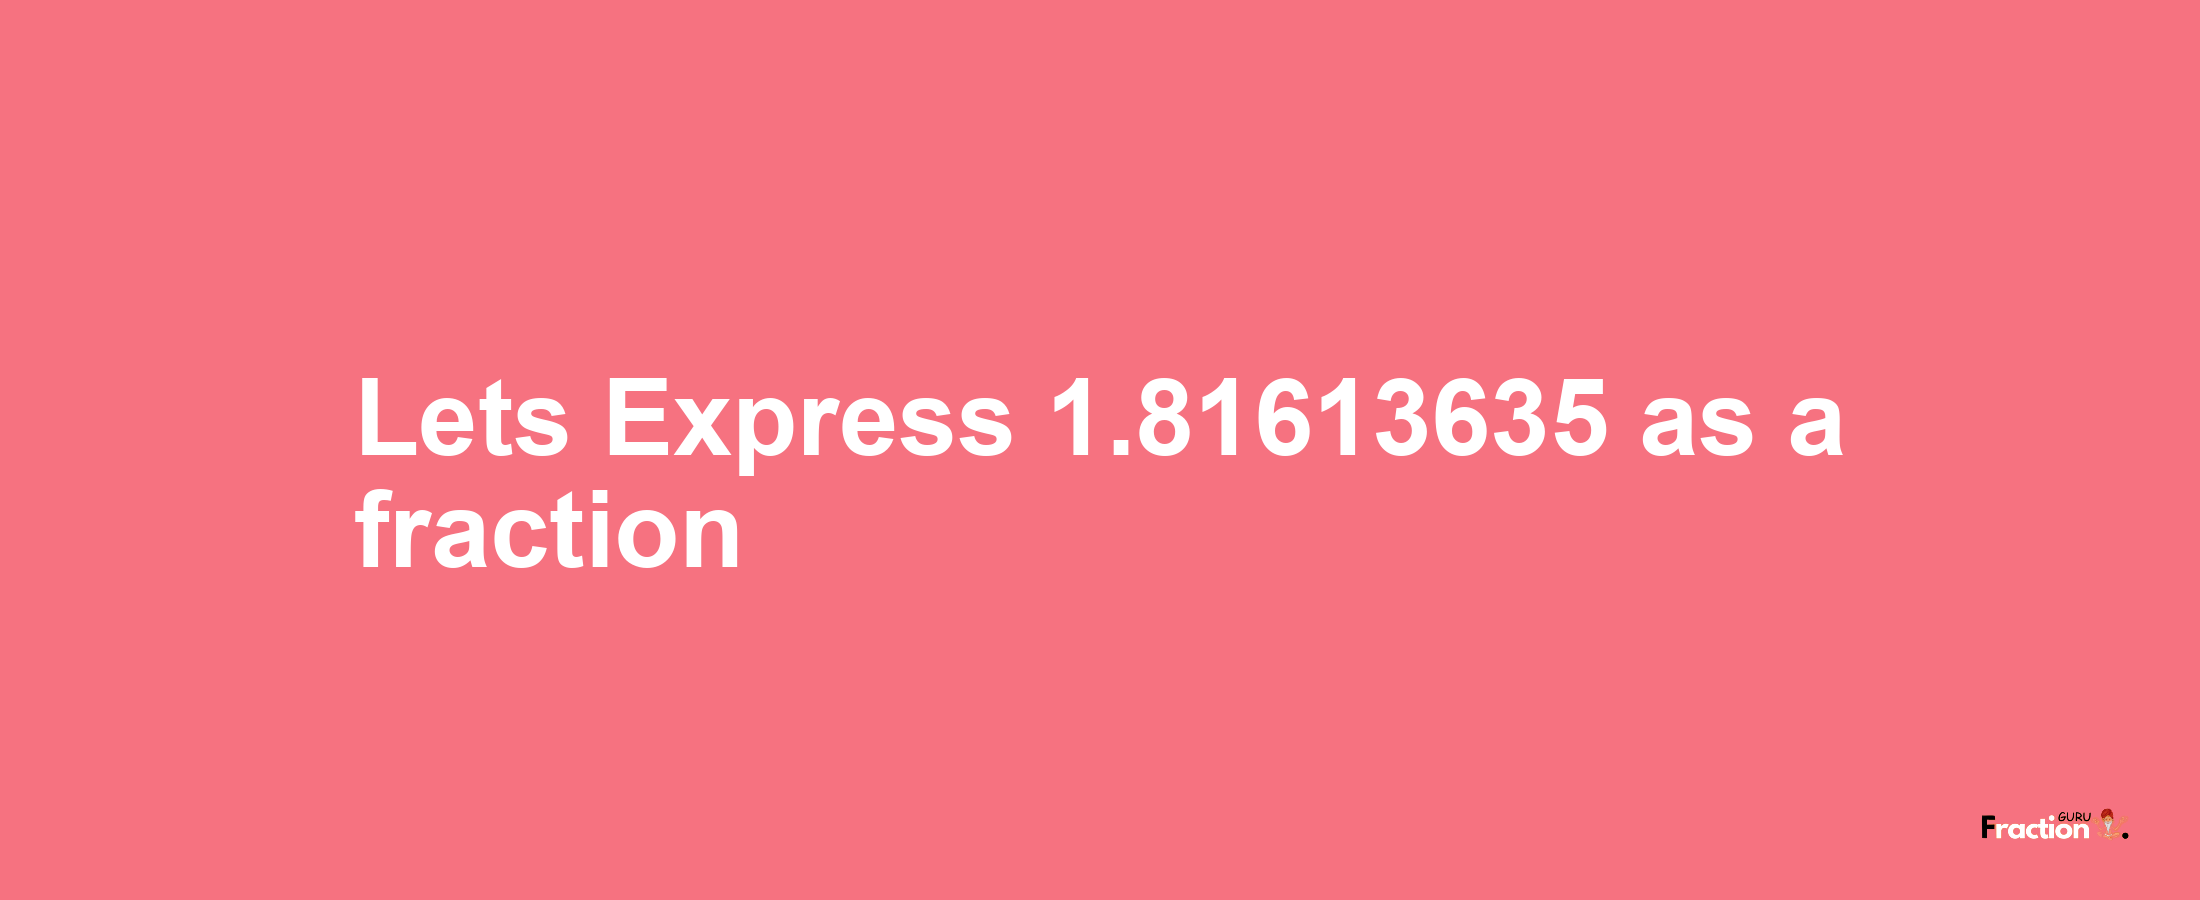 Lets Express 1.81613635 as afraction